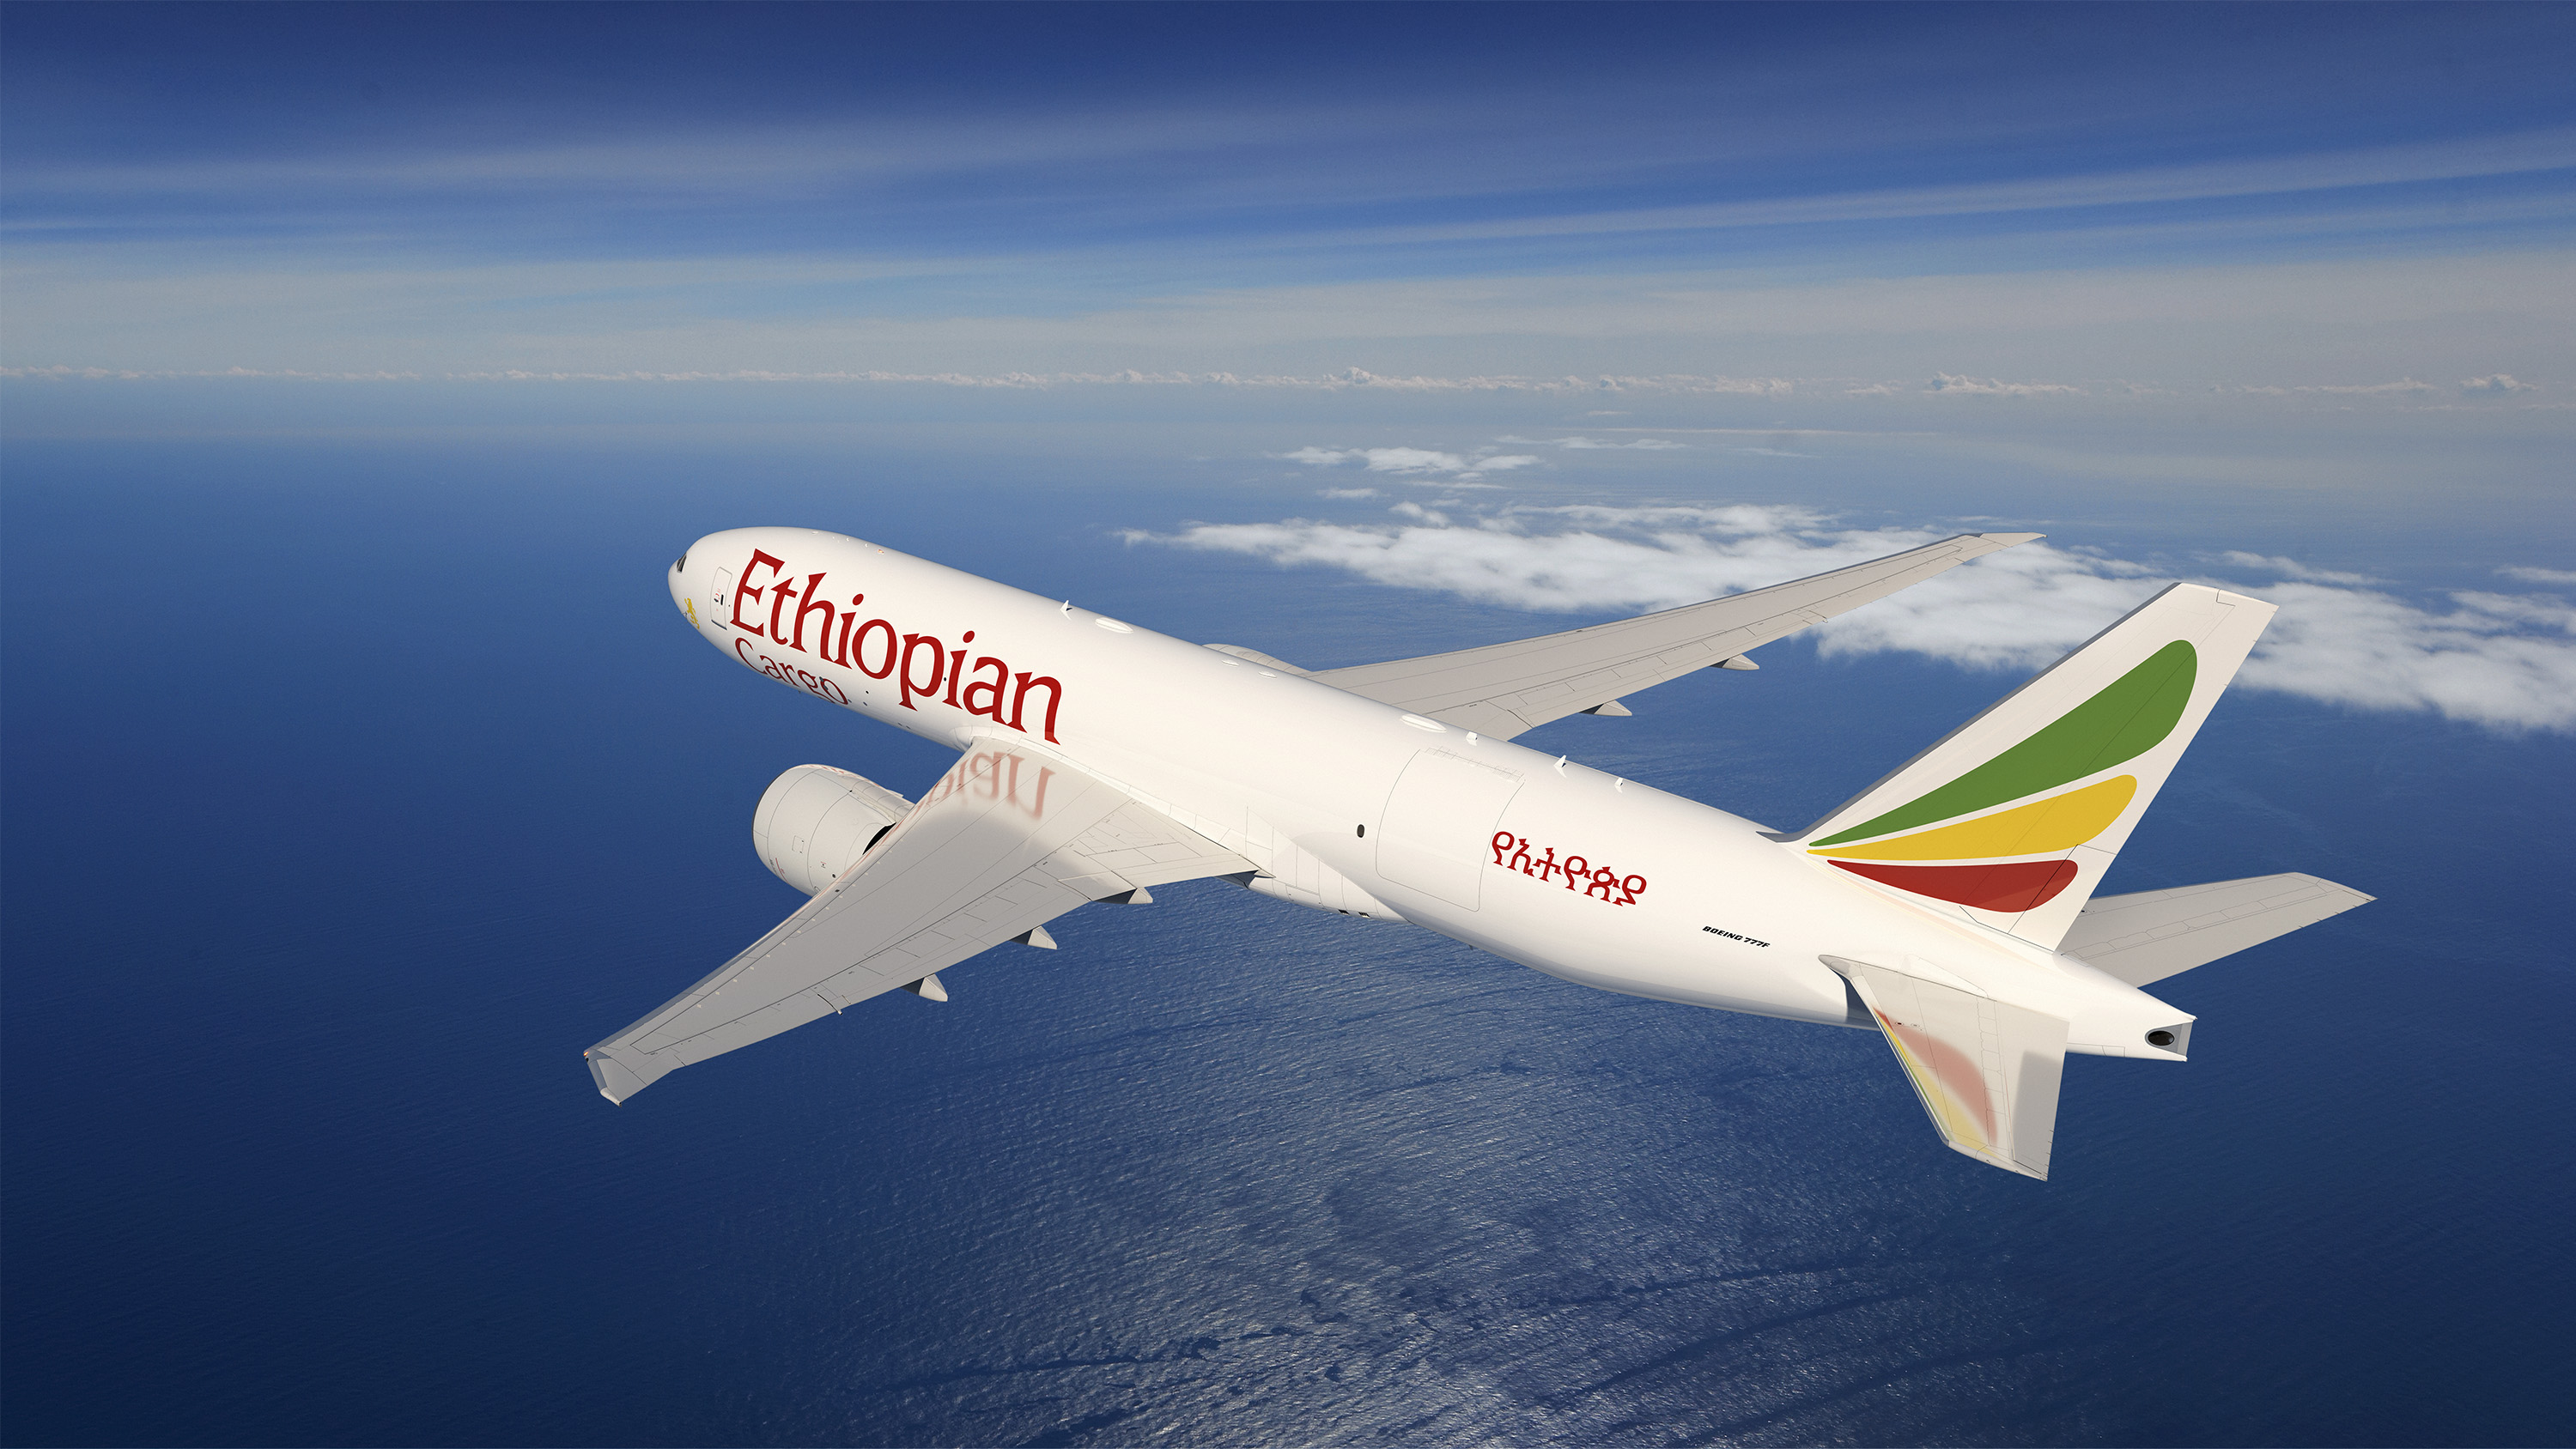 Ethiopian Airlines Becomes the Fastest Growing Airline Brand, Brand Finance